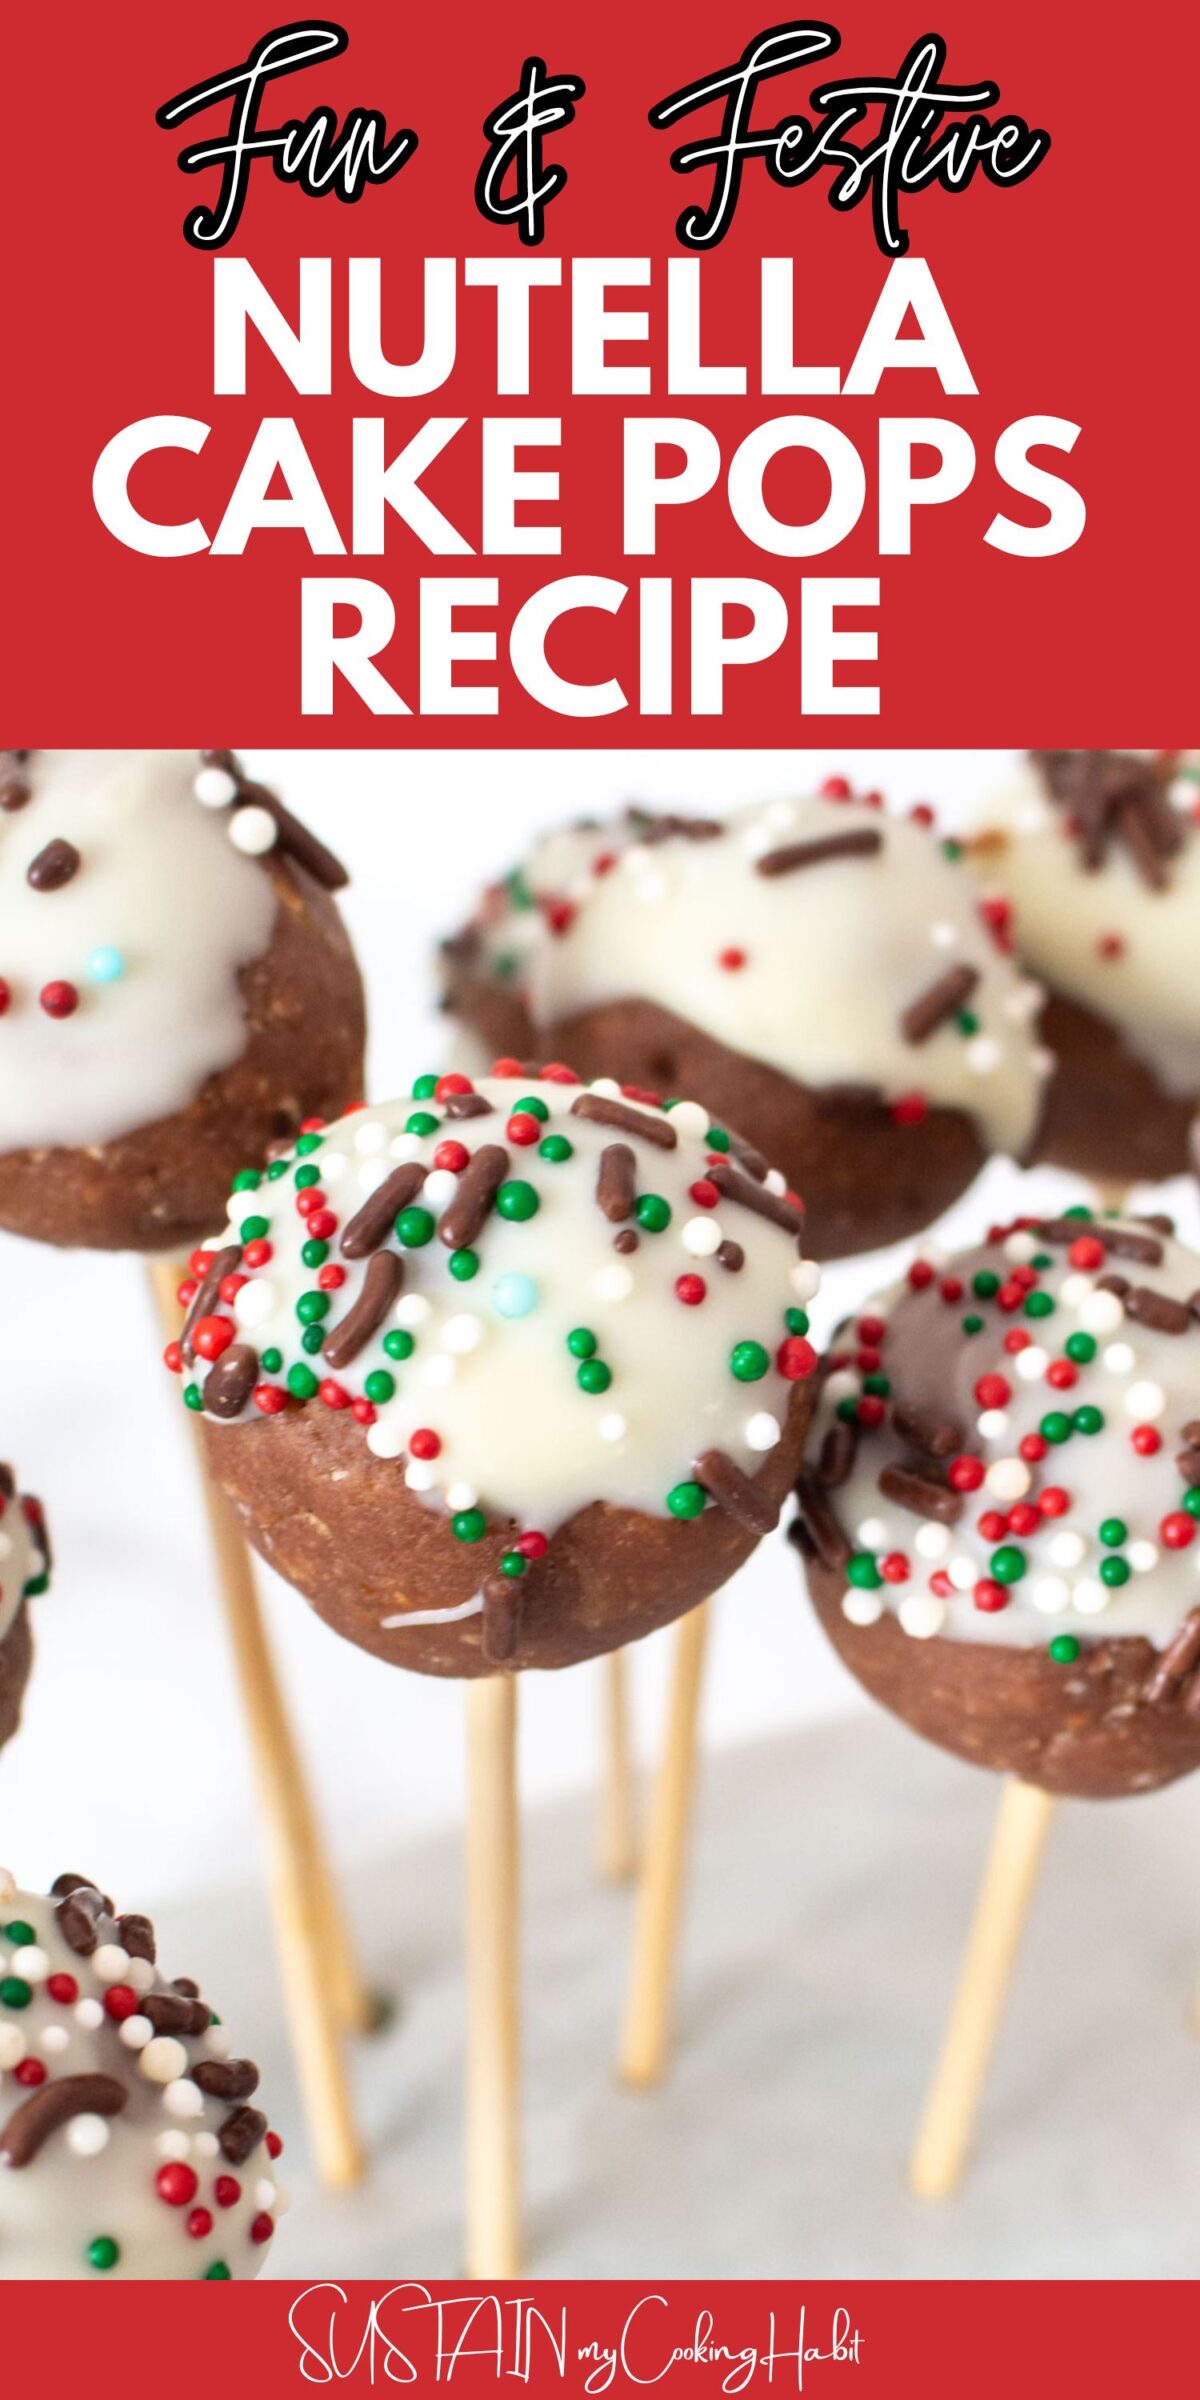 Nutella cake pops with icing and sprinkles on a wood stick with text overlay.